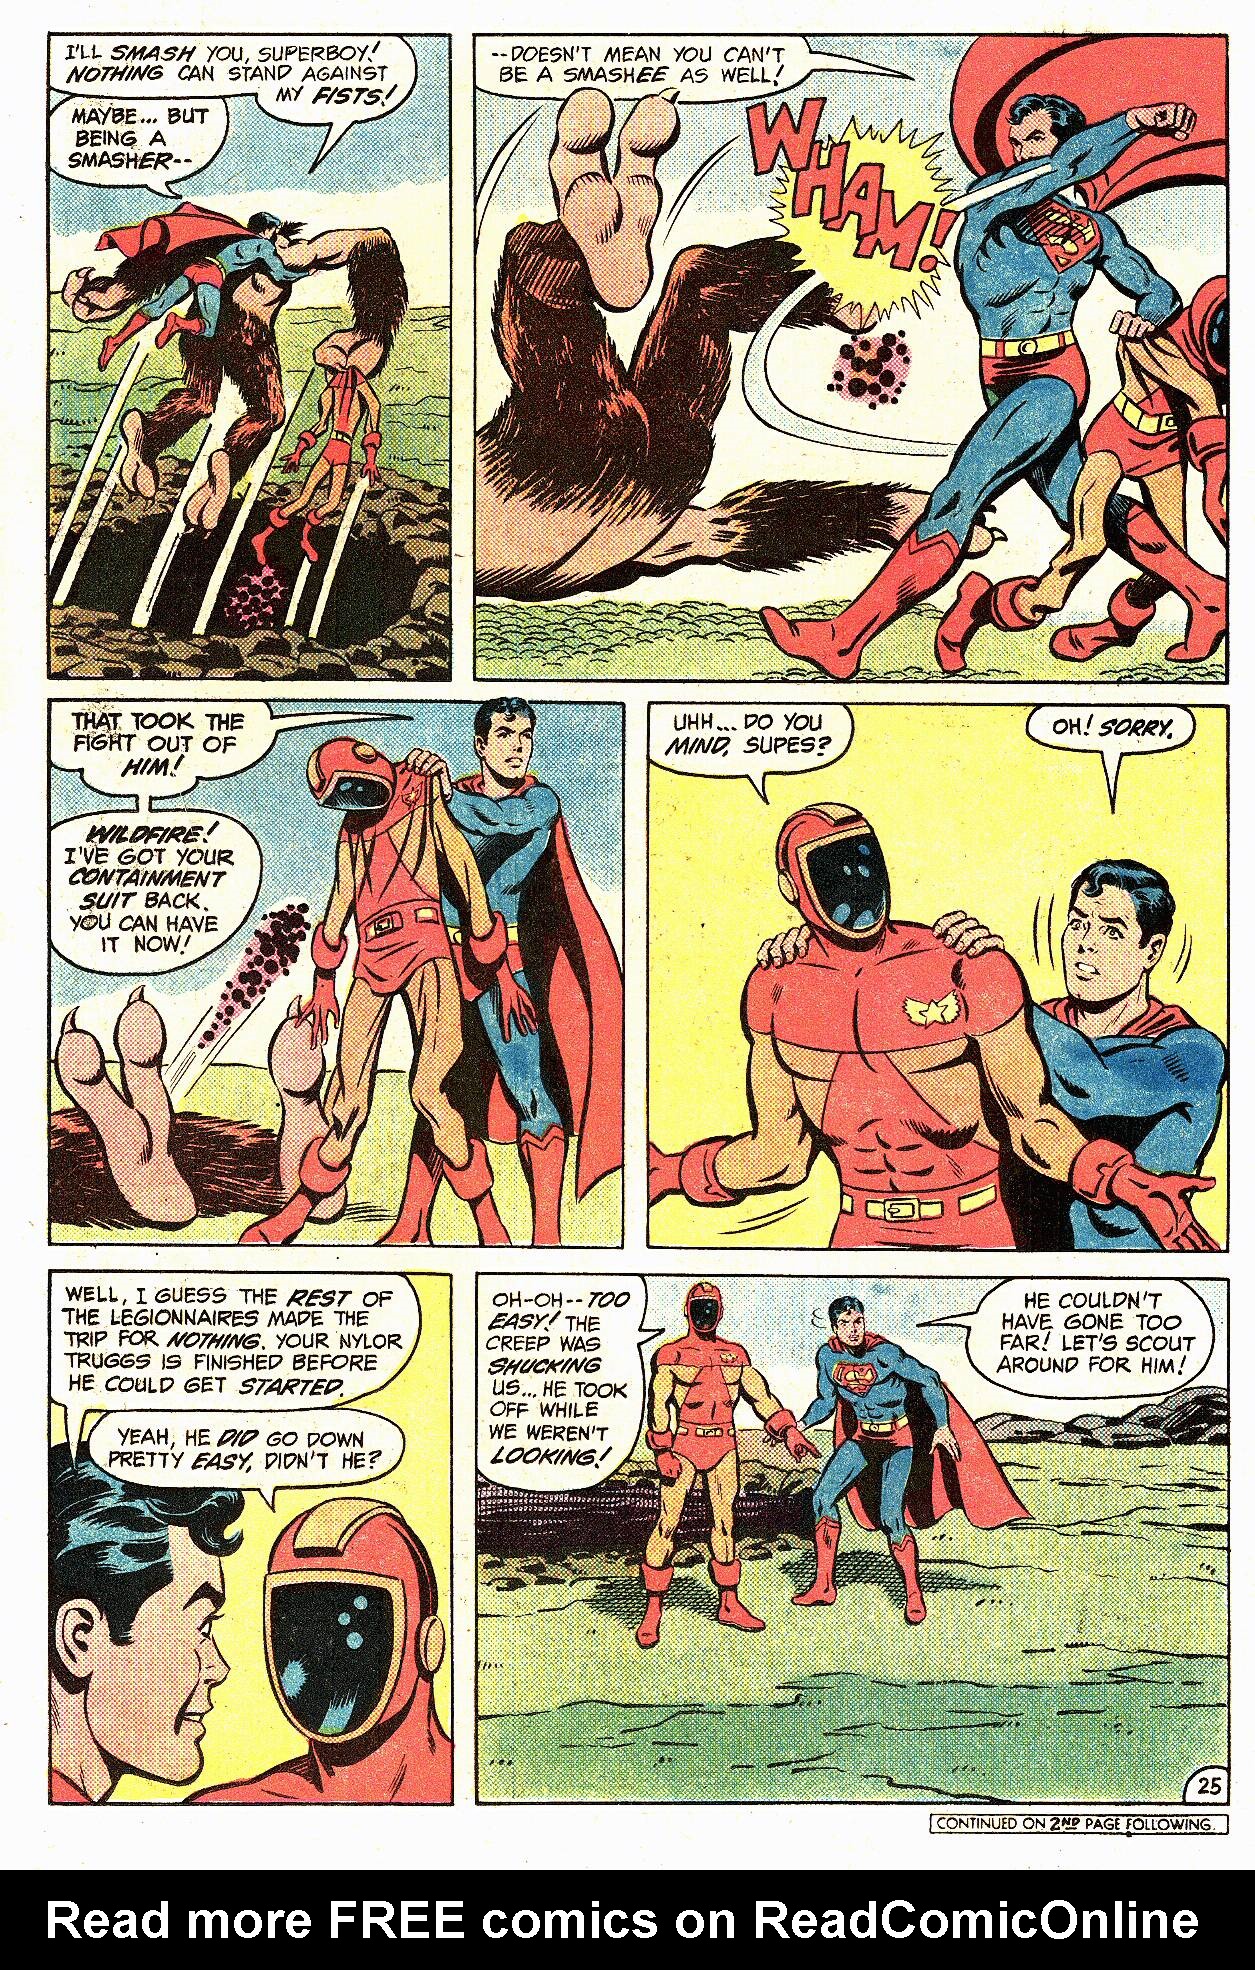 The New Adventures of Superboy 50 Page 25